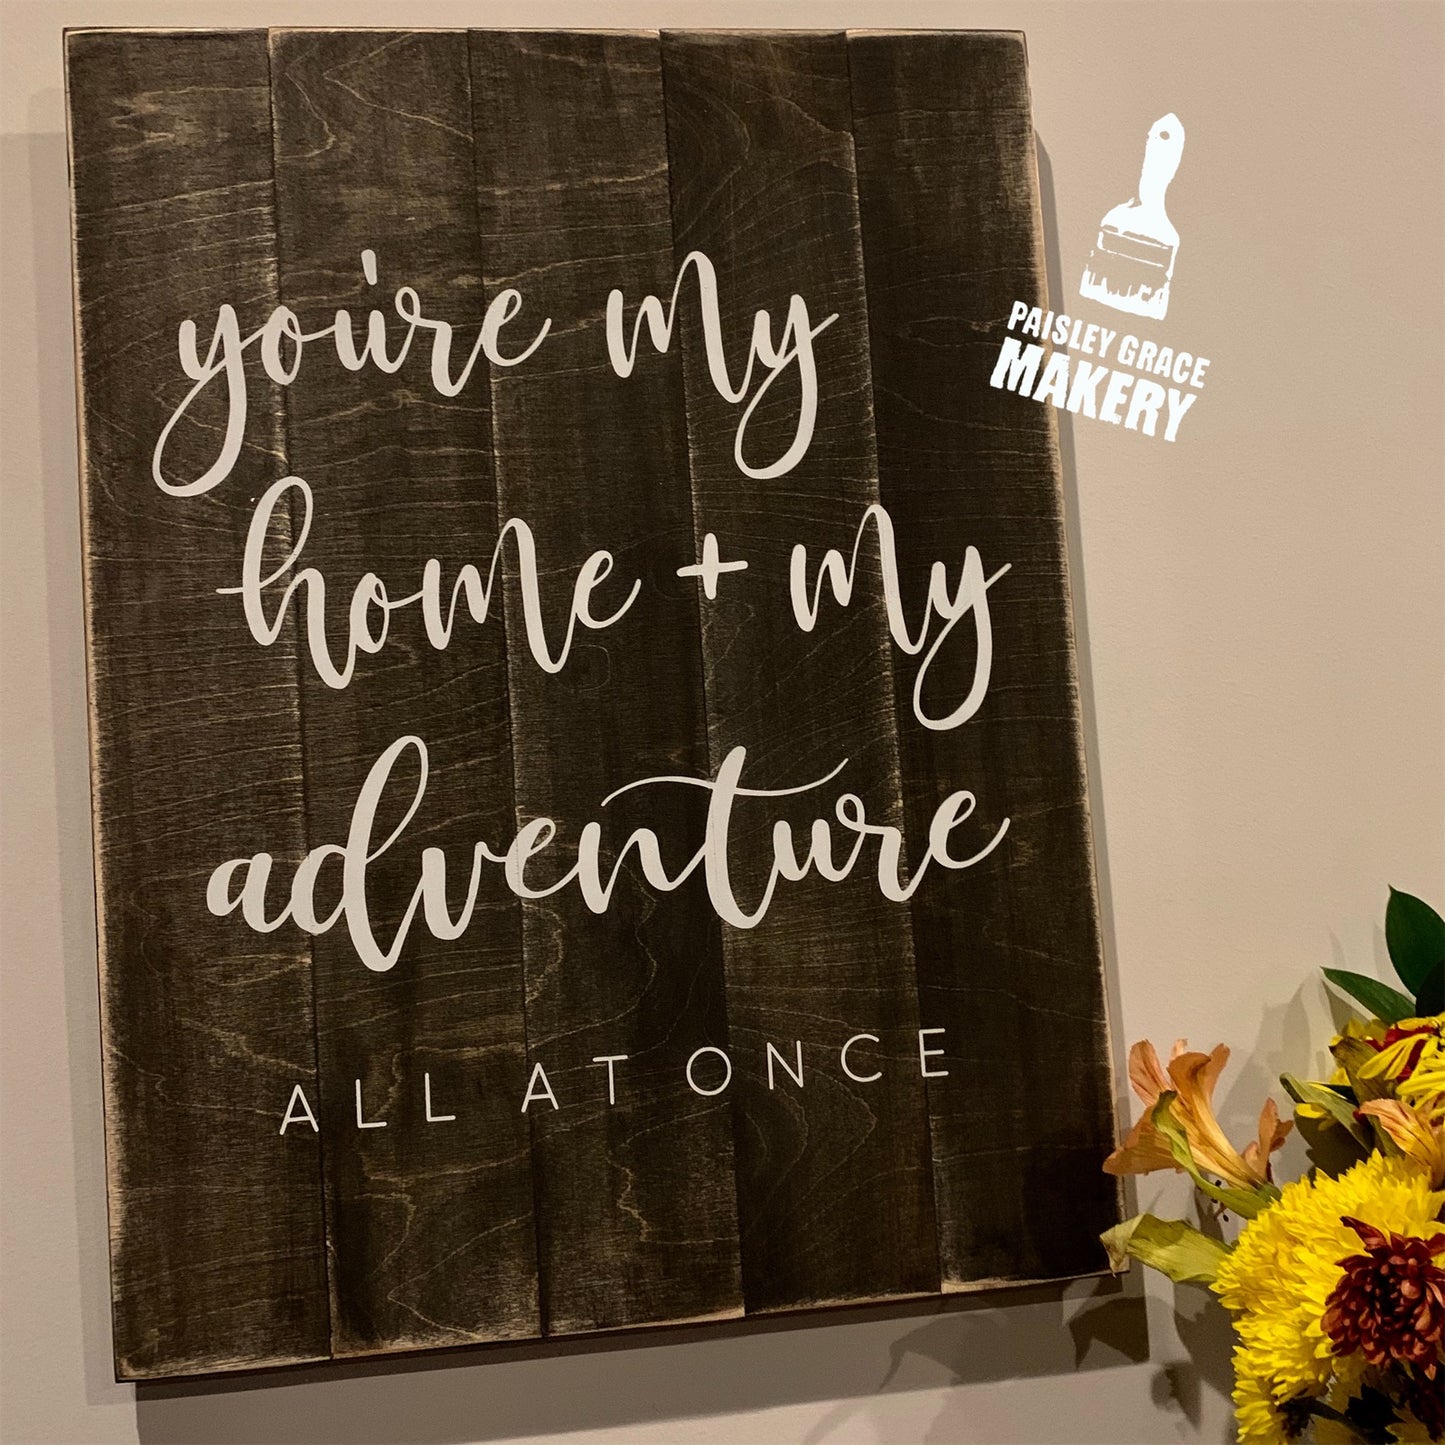 You're my Home + my Adventure: SIGNATURE DESIGN - Paisley Grace Makery